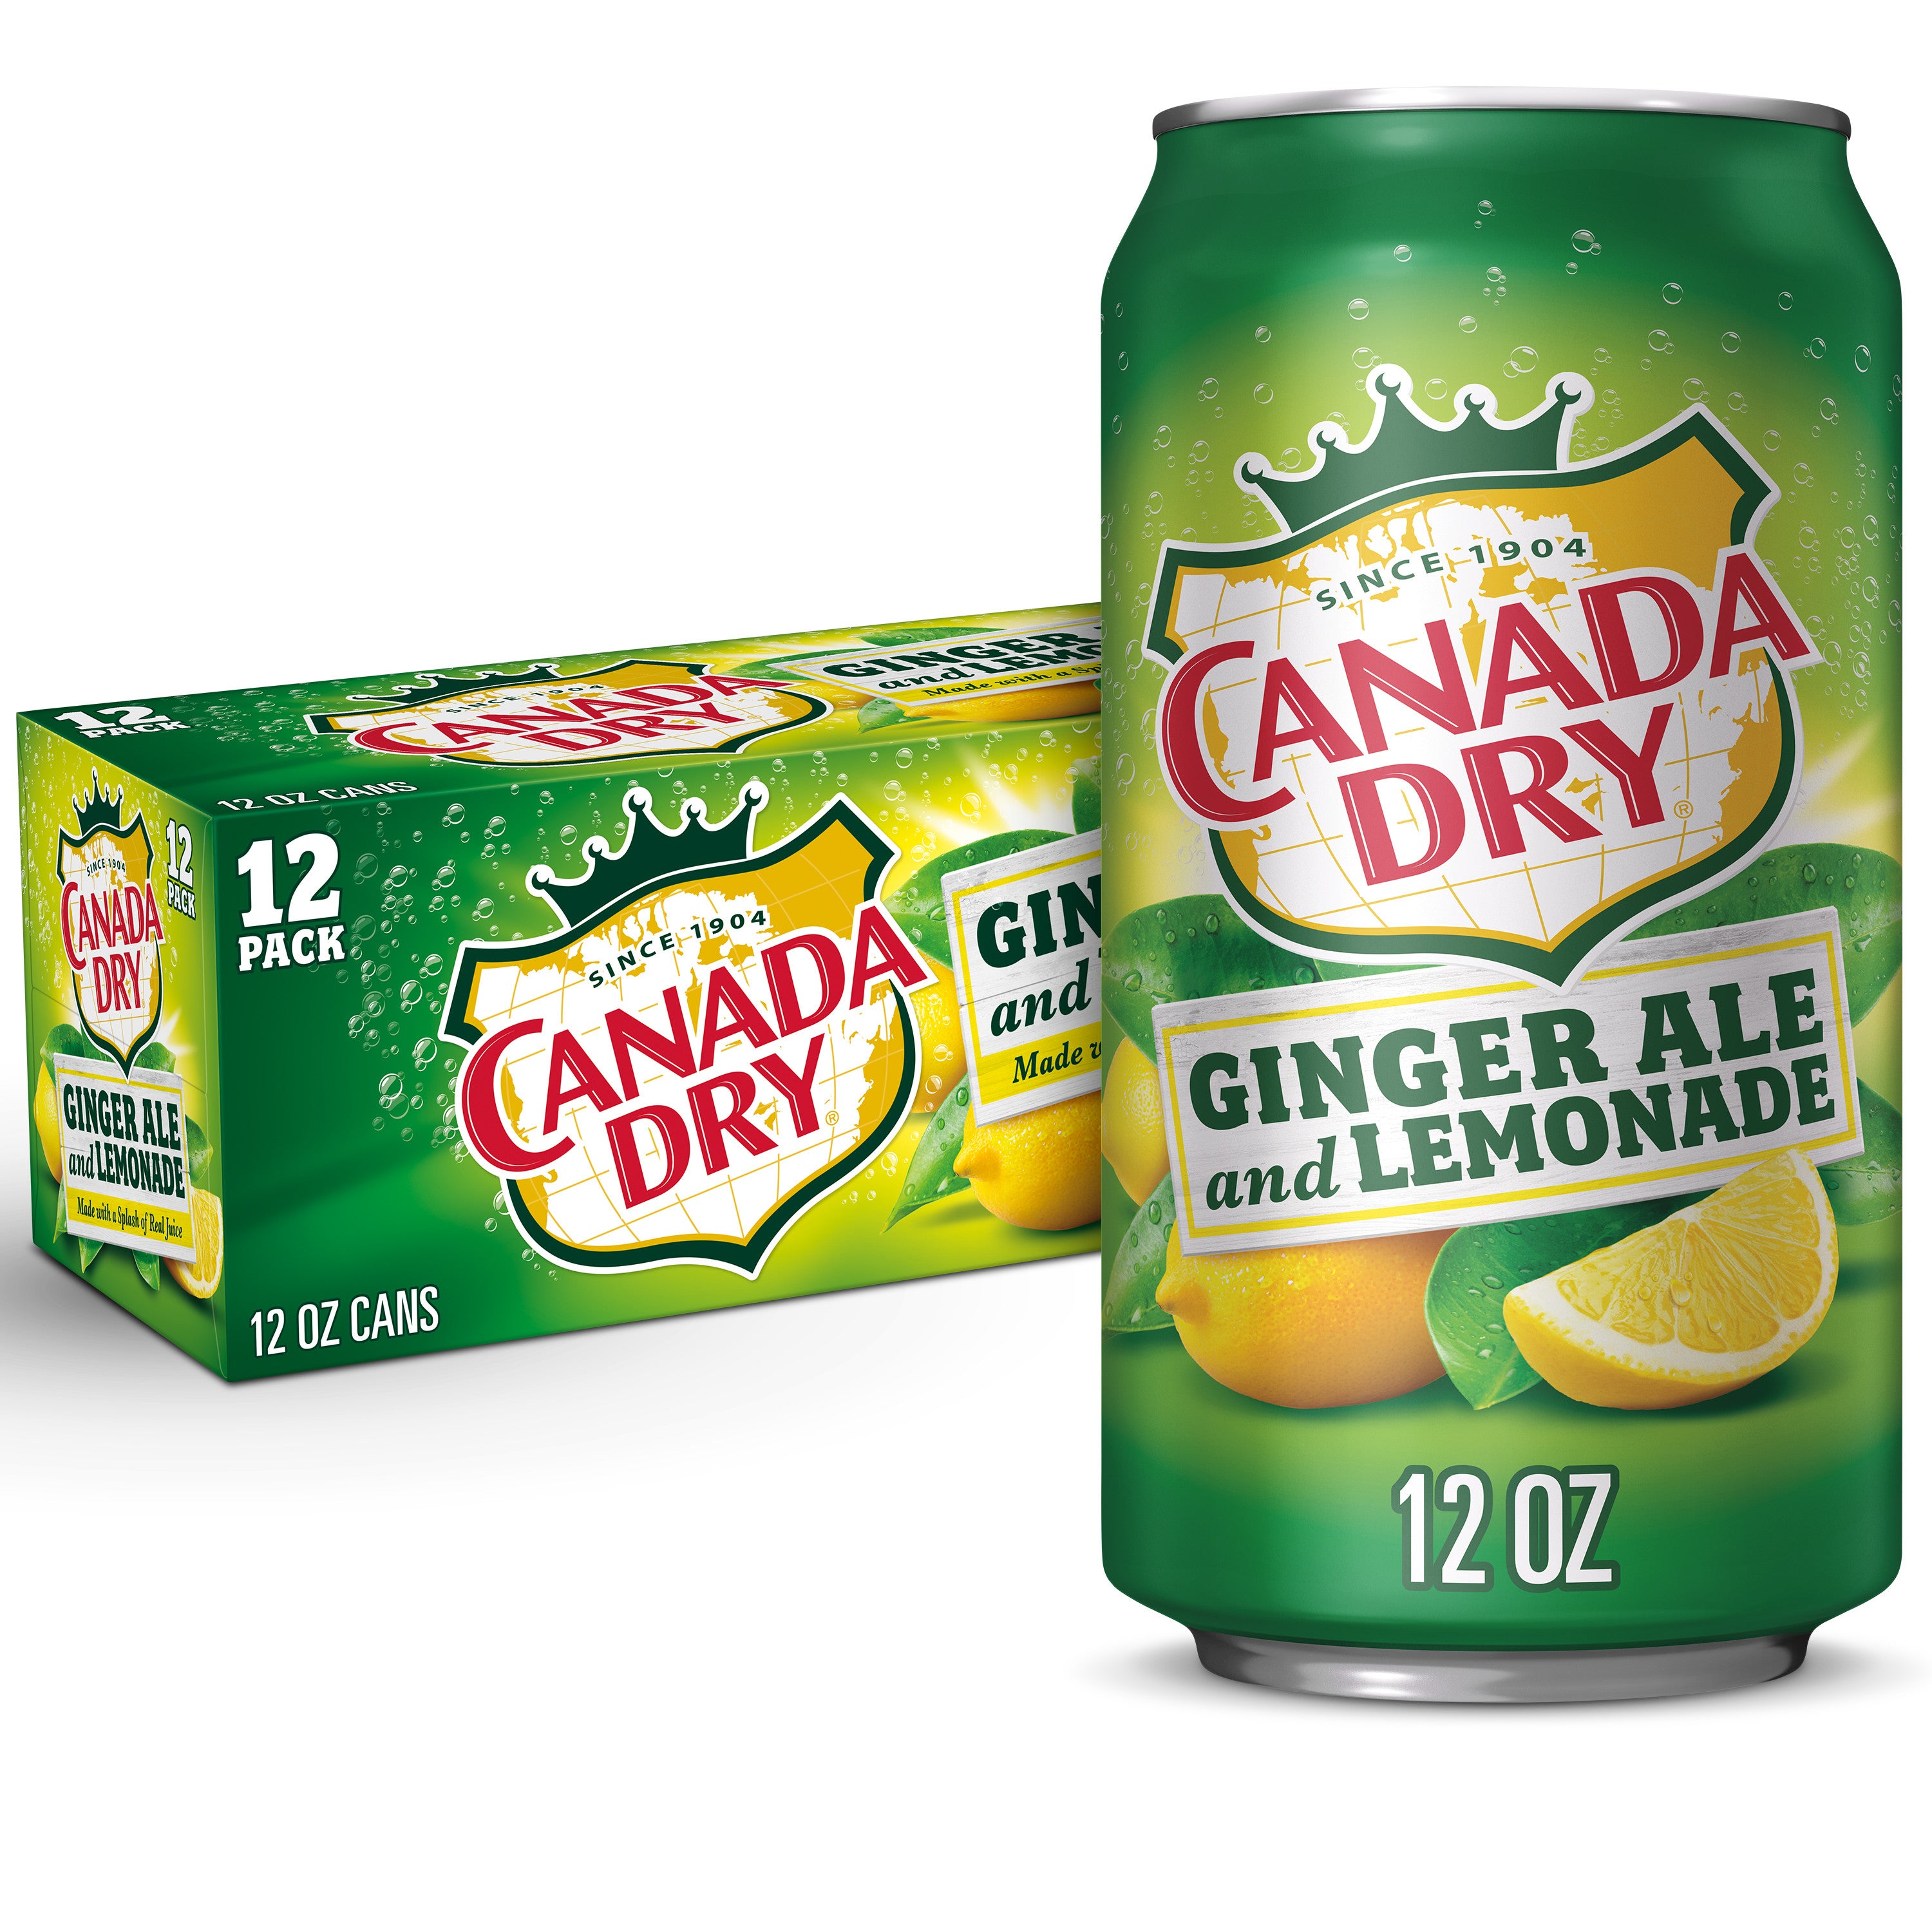 Canada Dry Ginger Ale and Lemonade - 12 OZ (12 Cans)